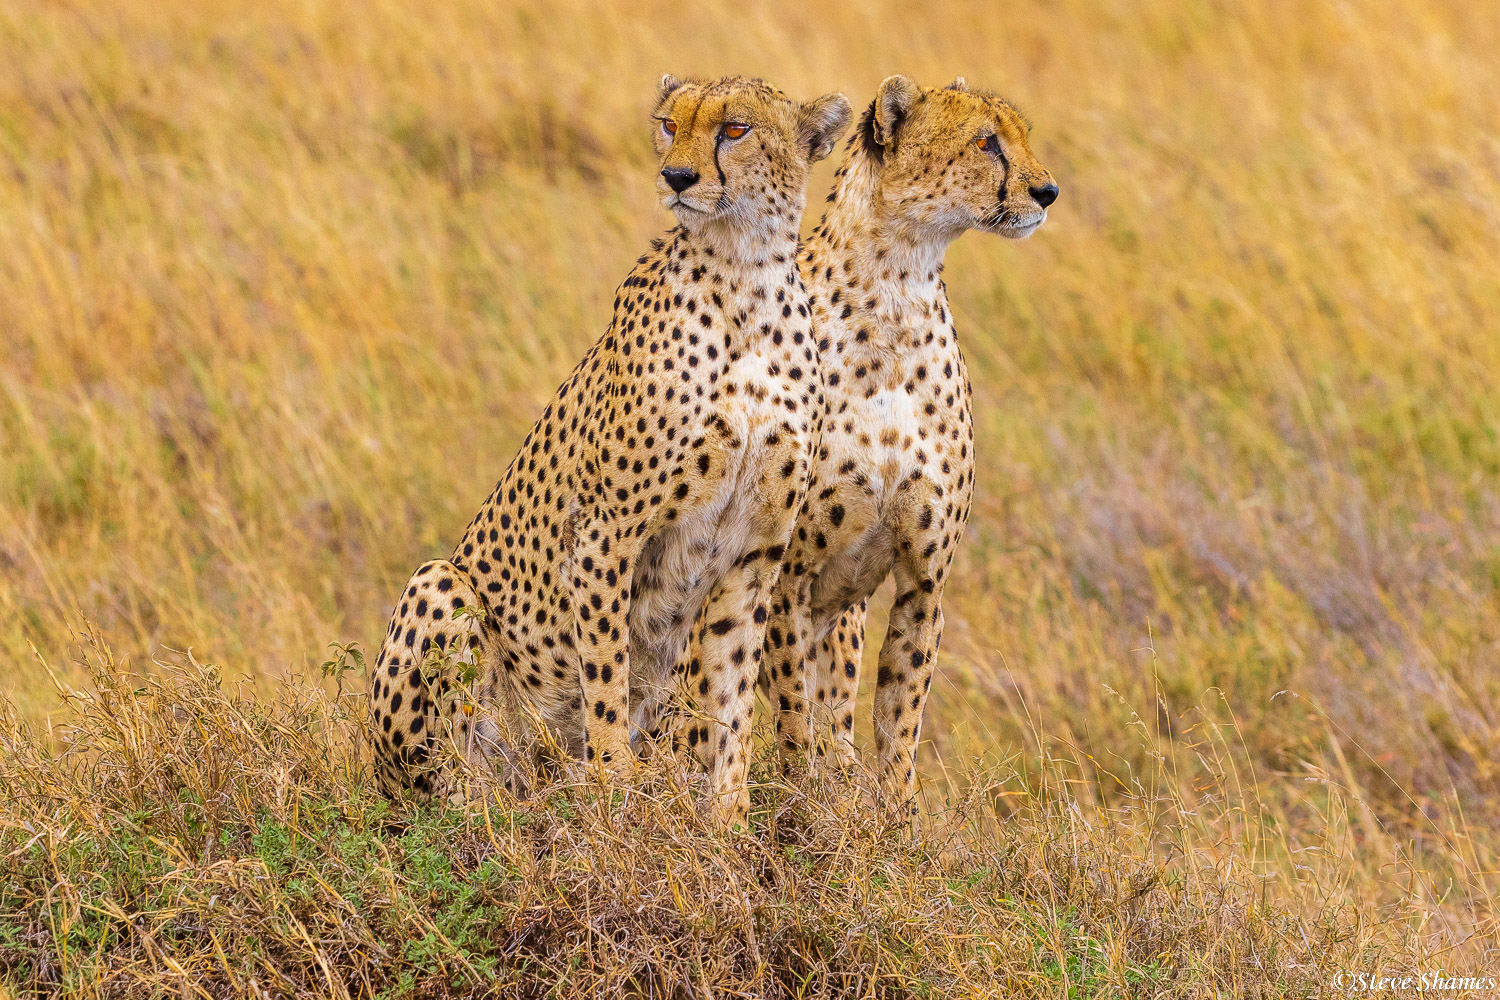 Cheetahs looking around. Two heads are better than one.